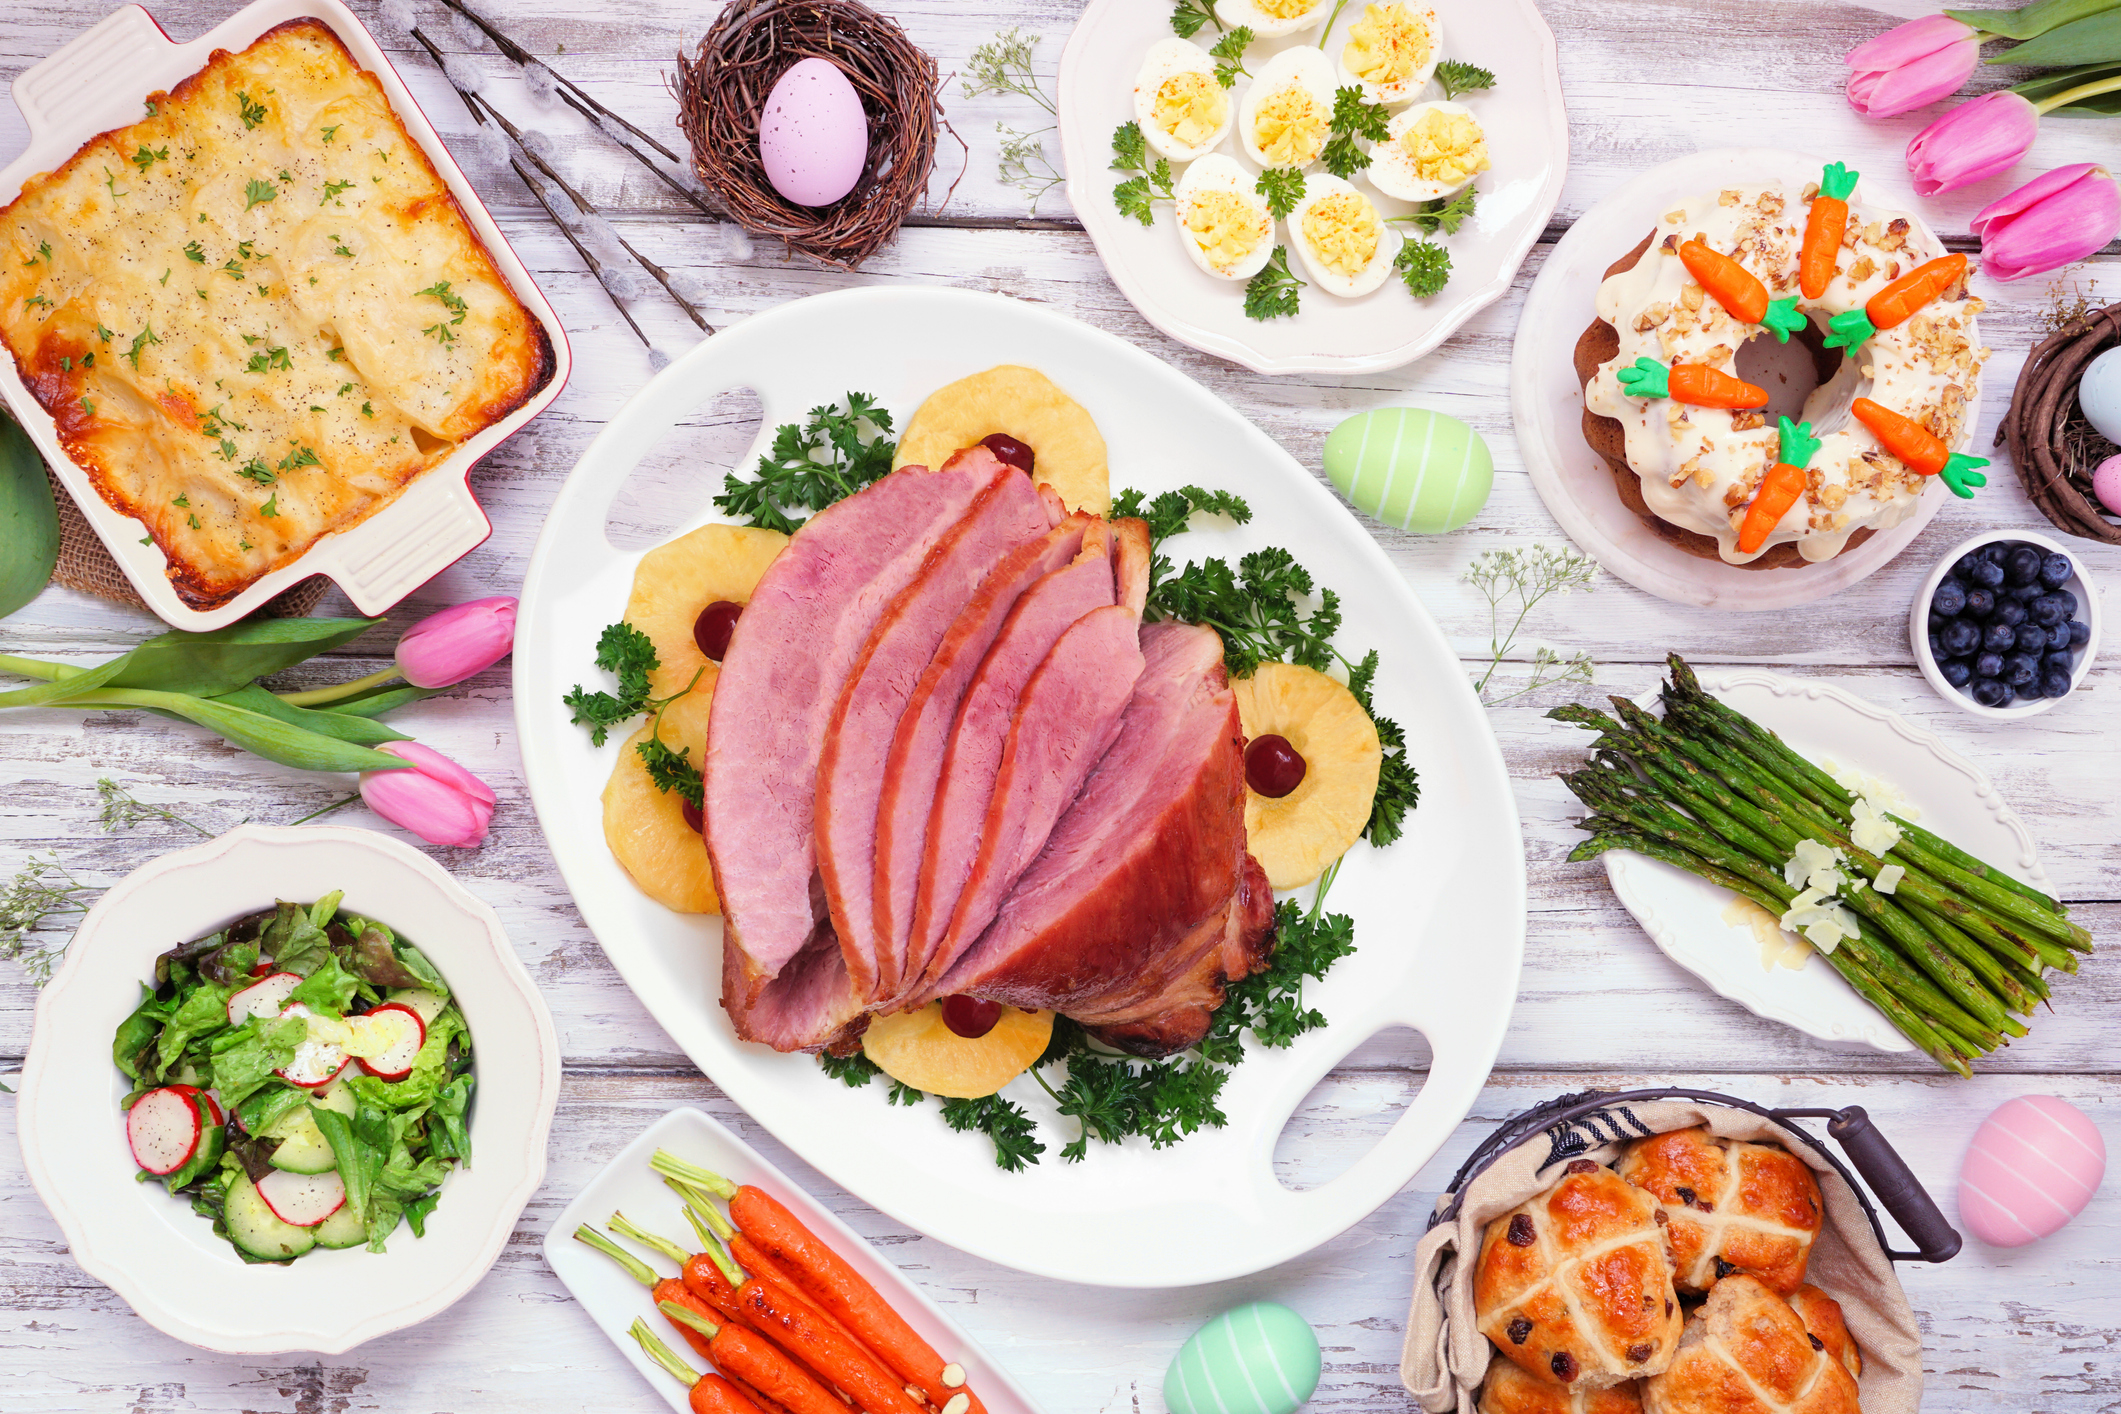 Traditional Easter ham dinner. Top view table scene on a white wood background. Ham, scalloped potatoes, eggs, hot cross buns, carrot cake and vegetables.